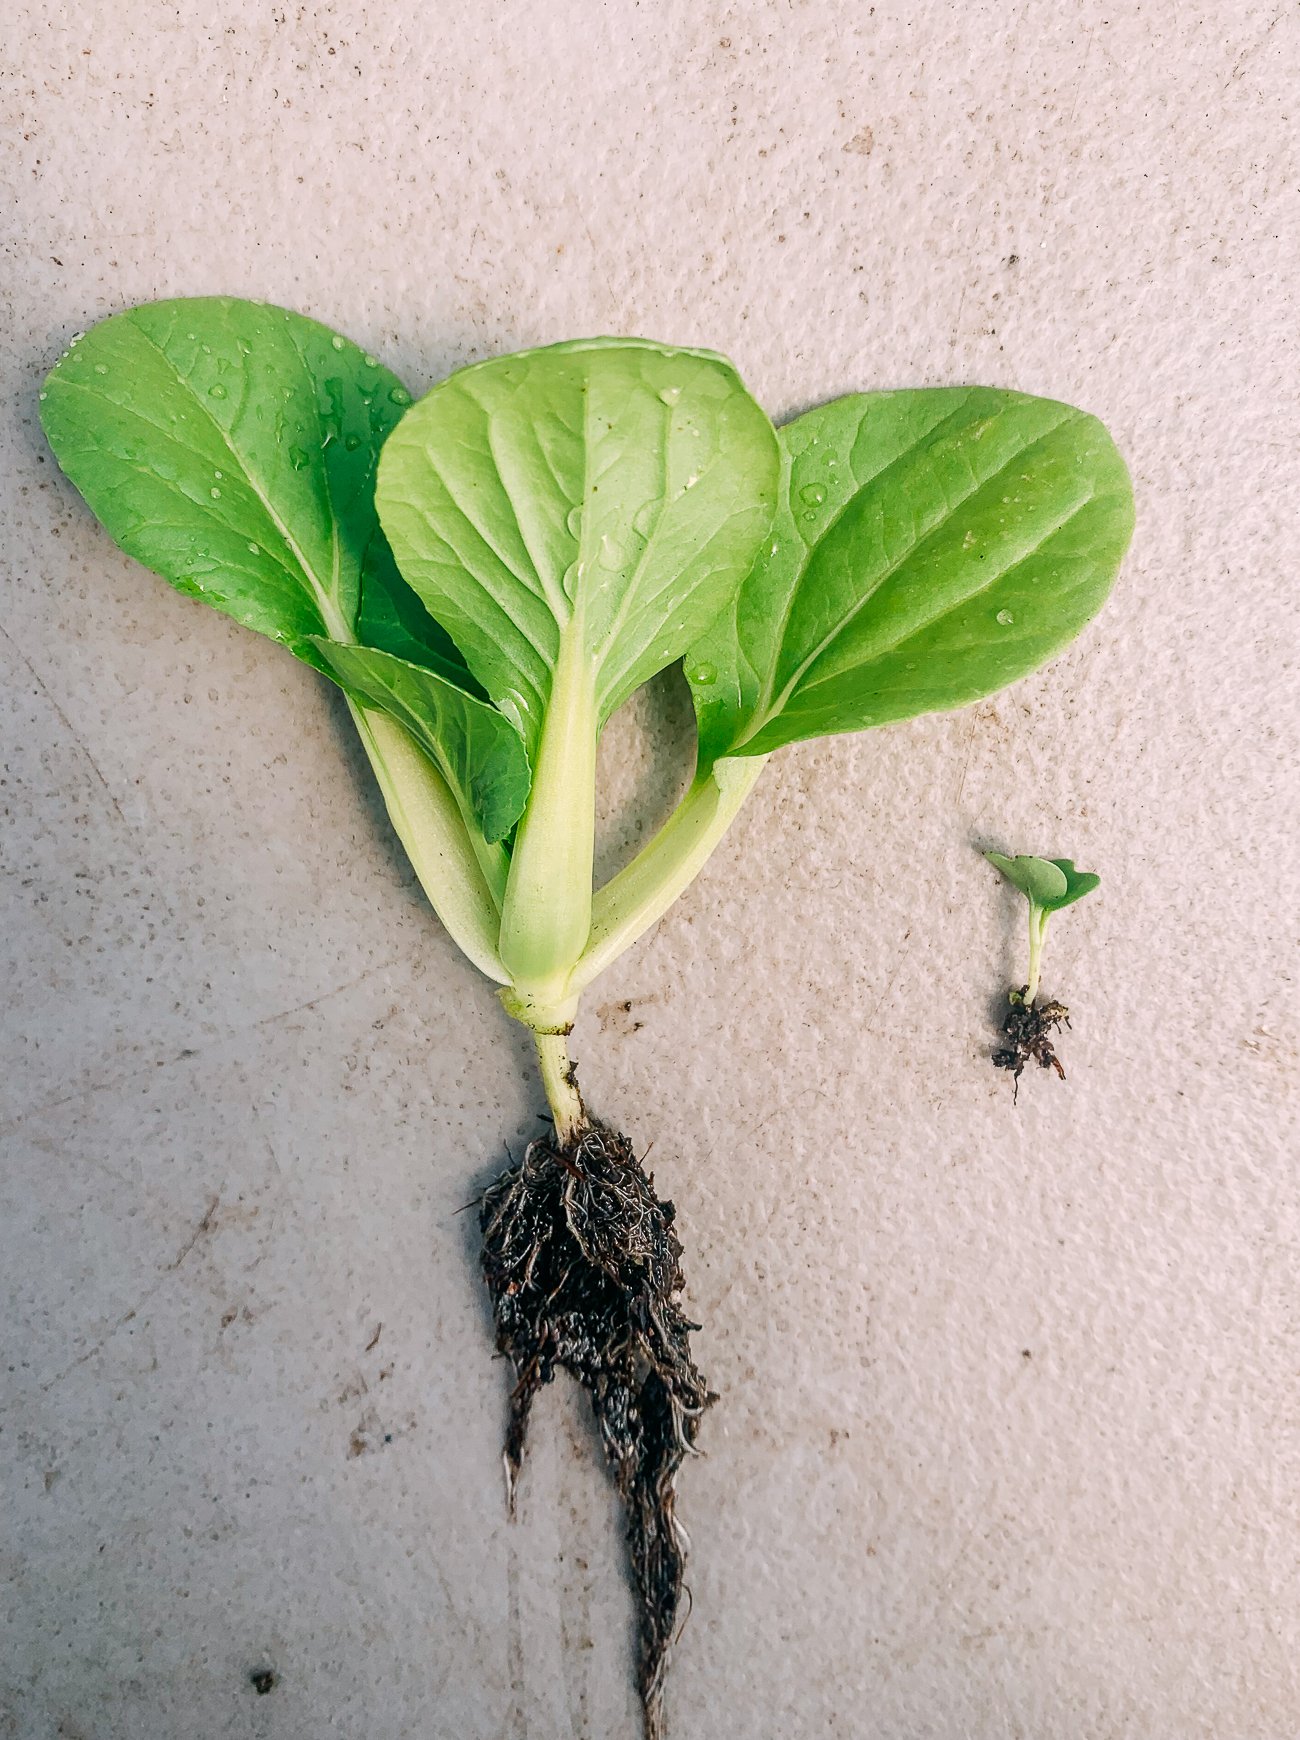 picture of bok choy plant and young seedling side by side